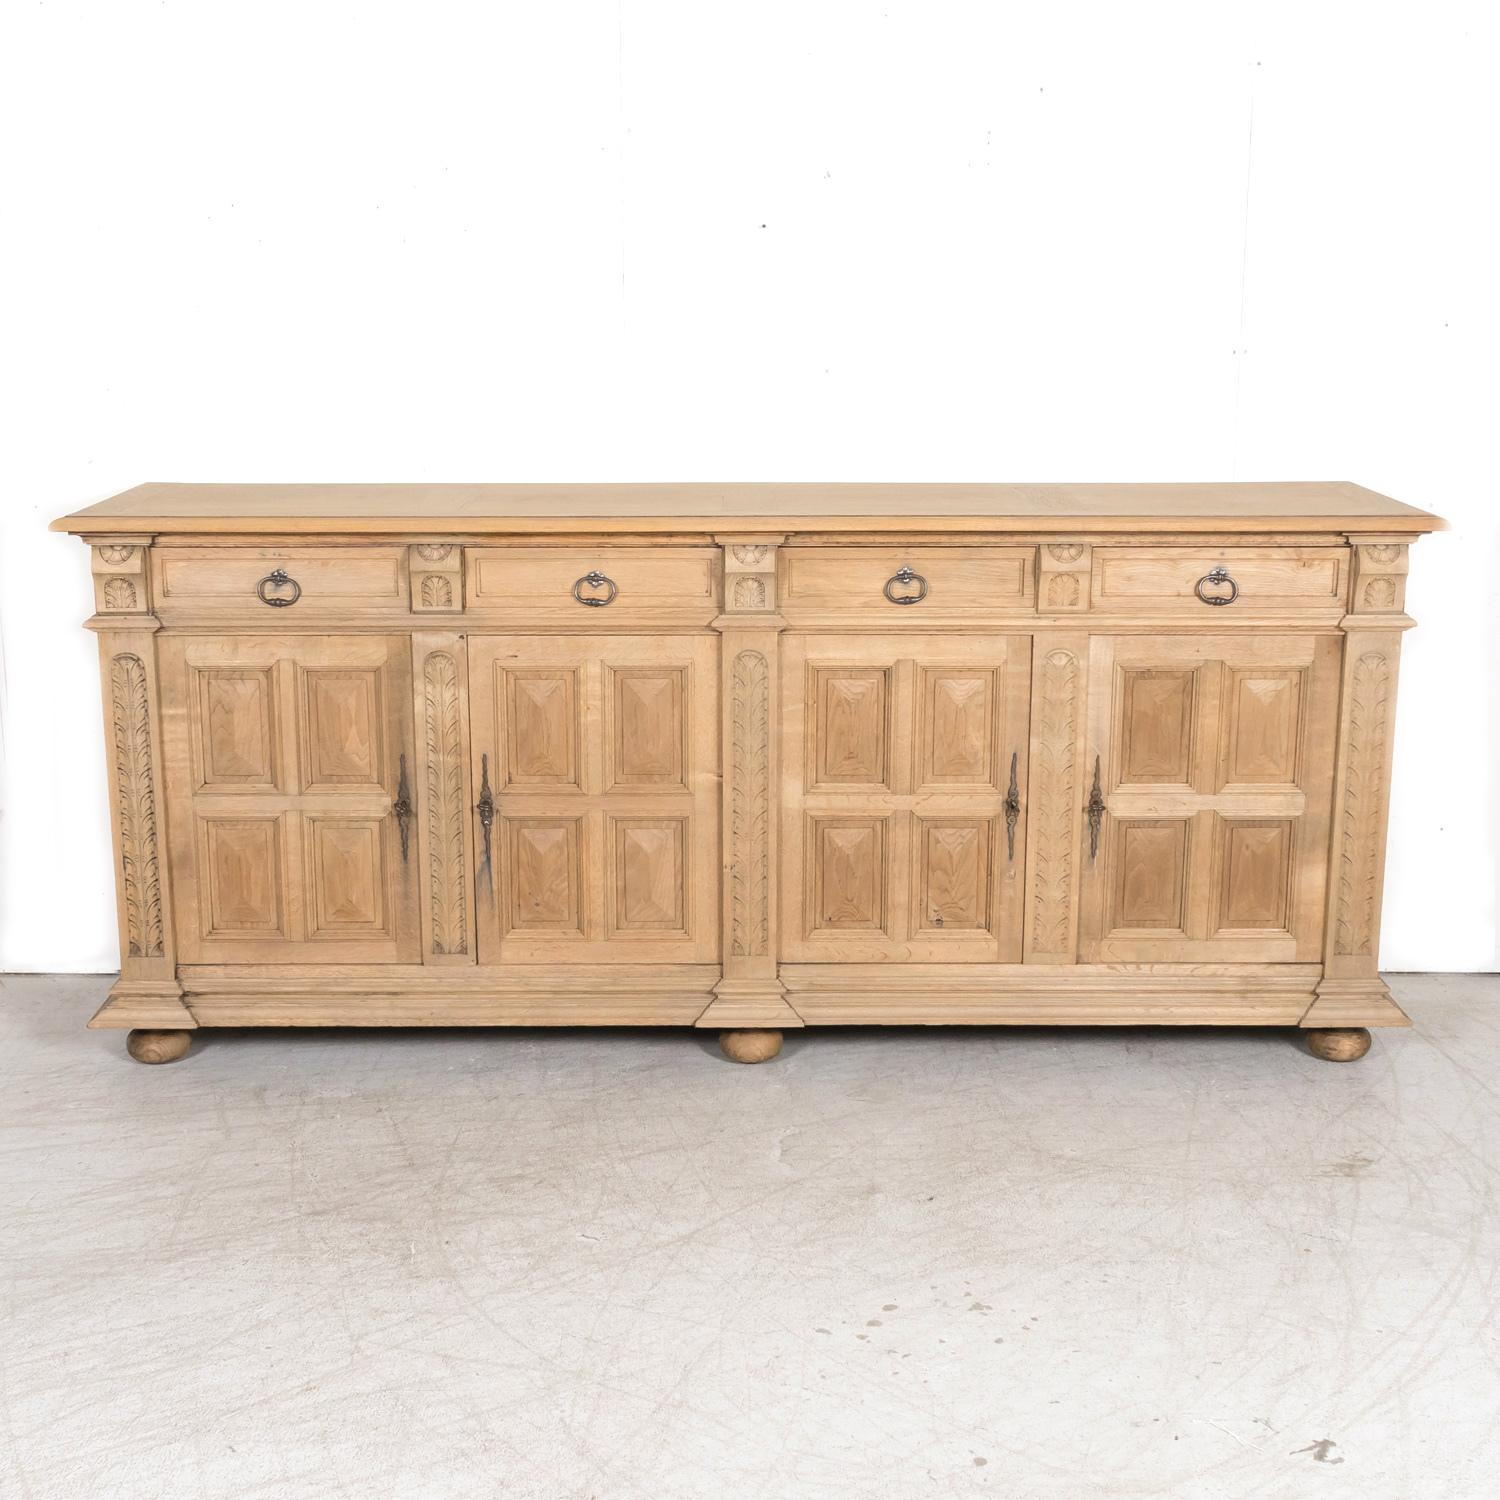 Early 20th Century Antique French Louis XIII Style Carved Bleached Oak Enfilade Buffet